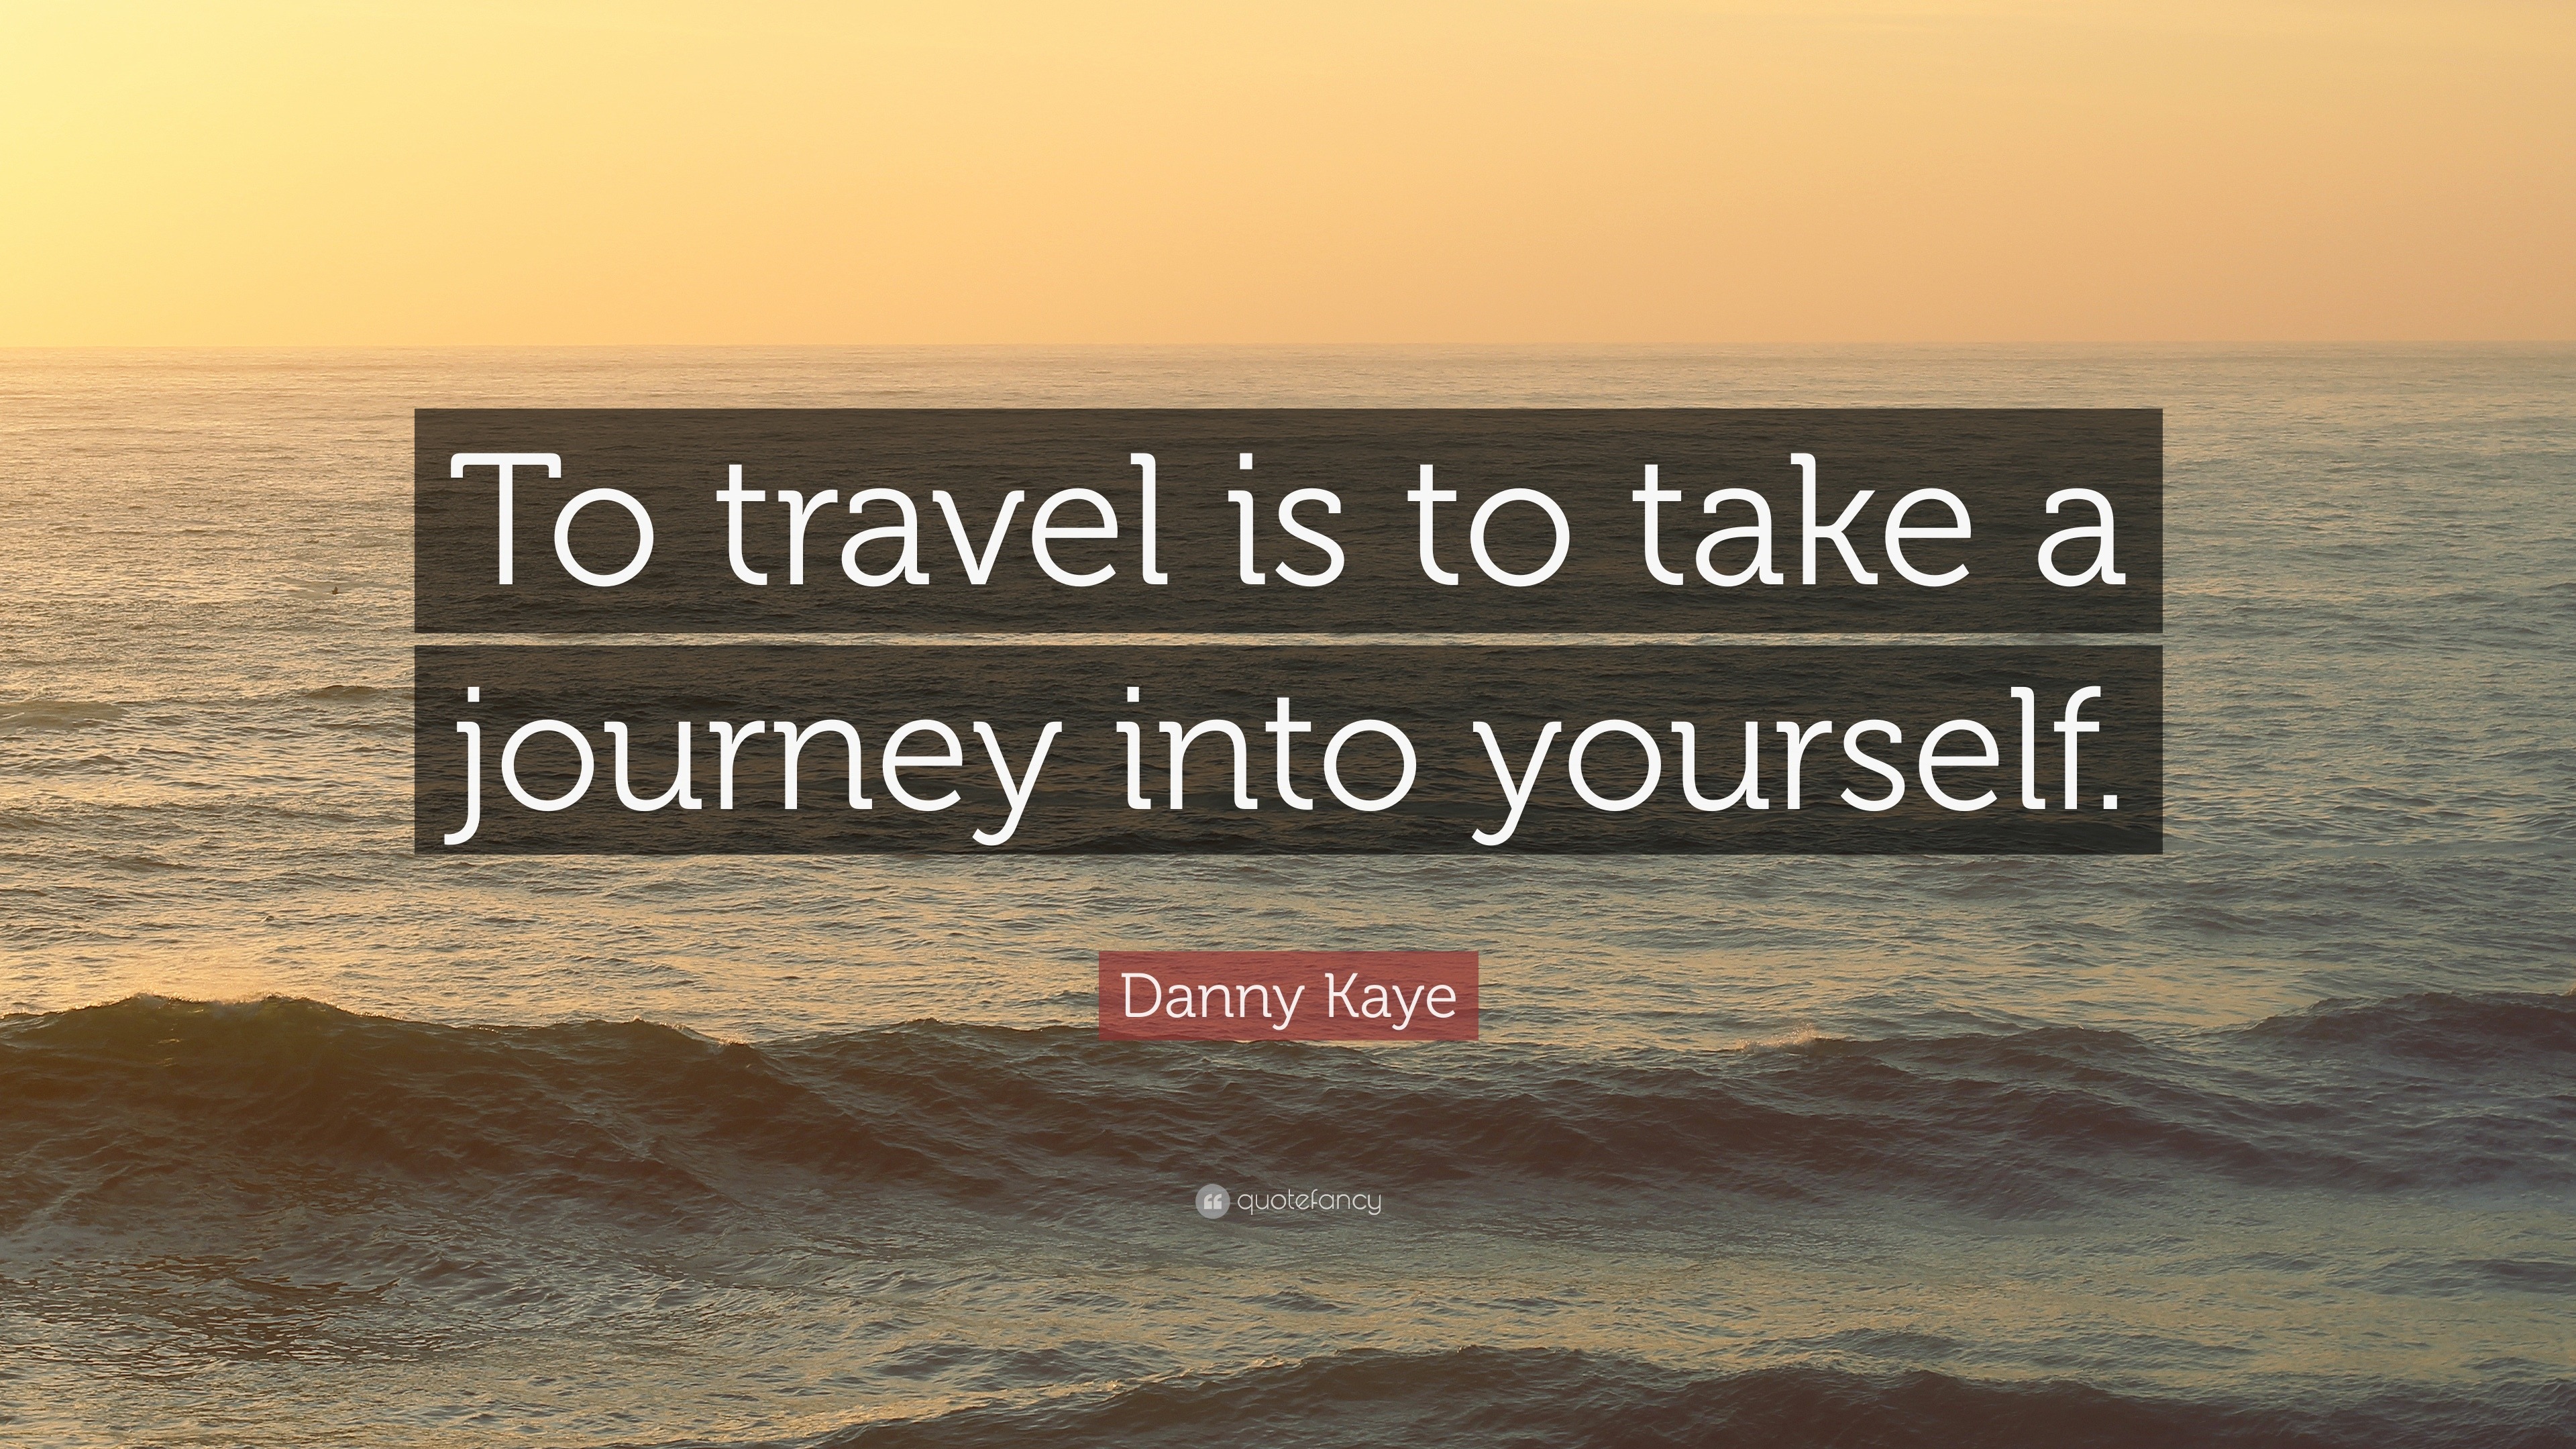 travel yourself meaning